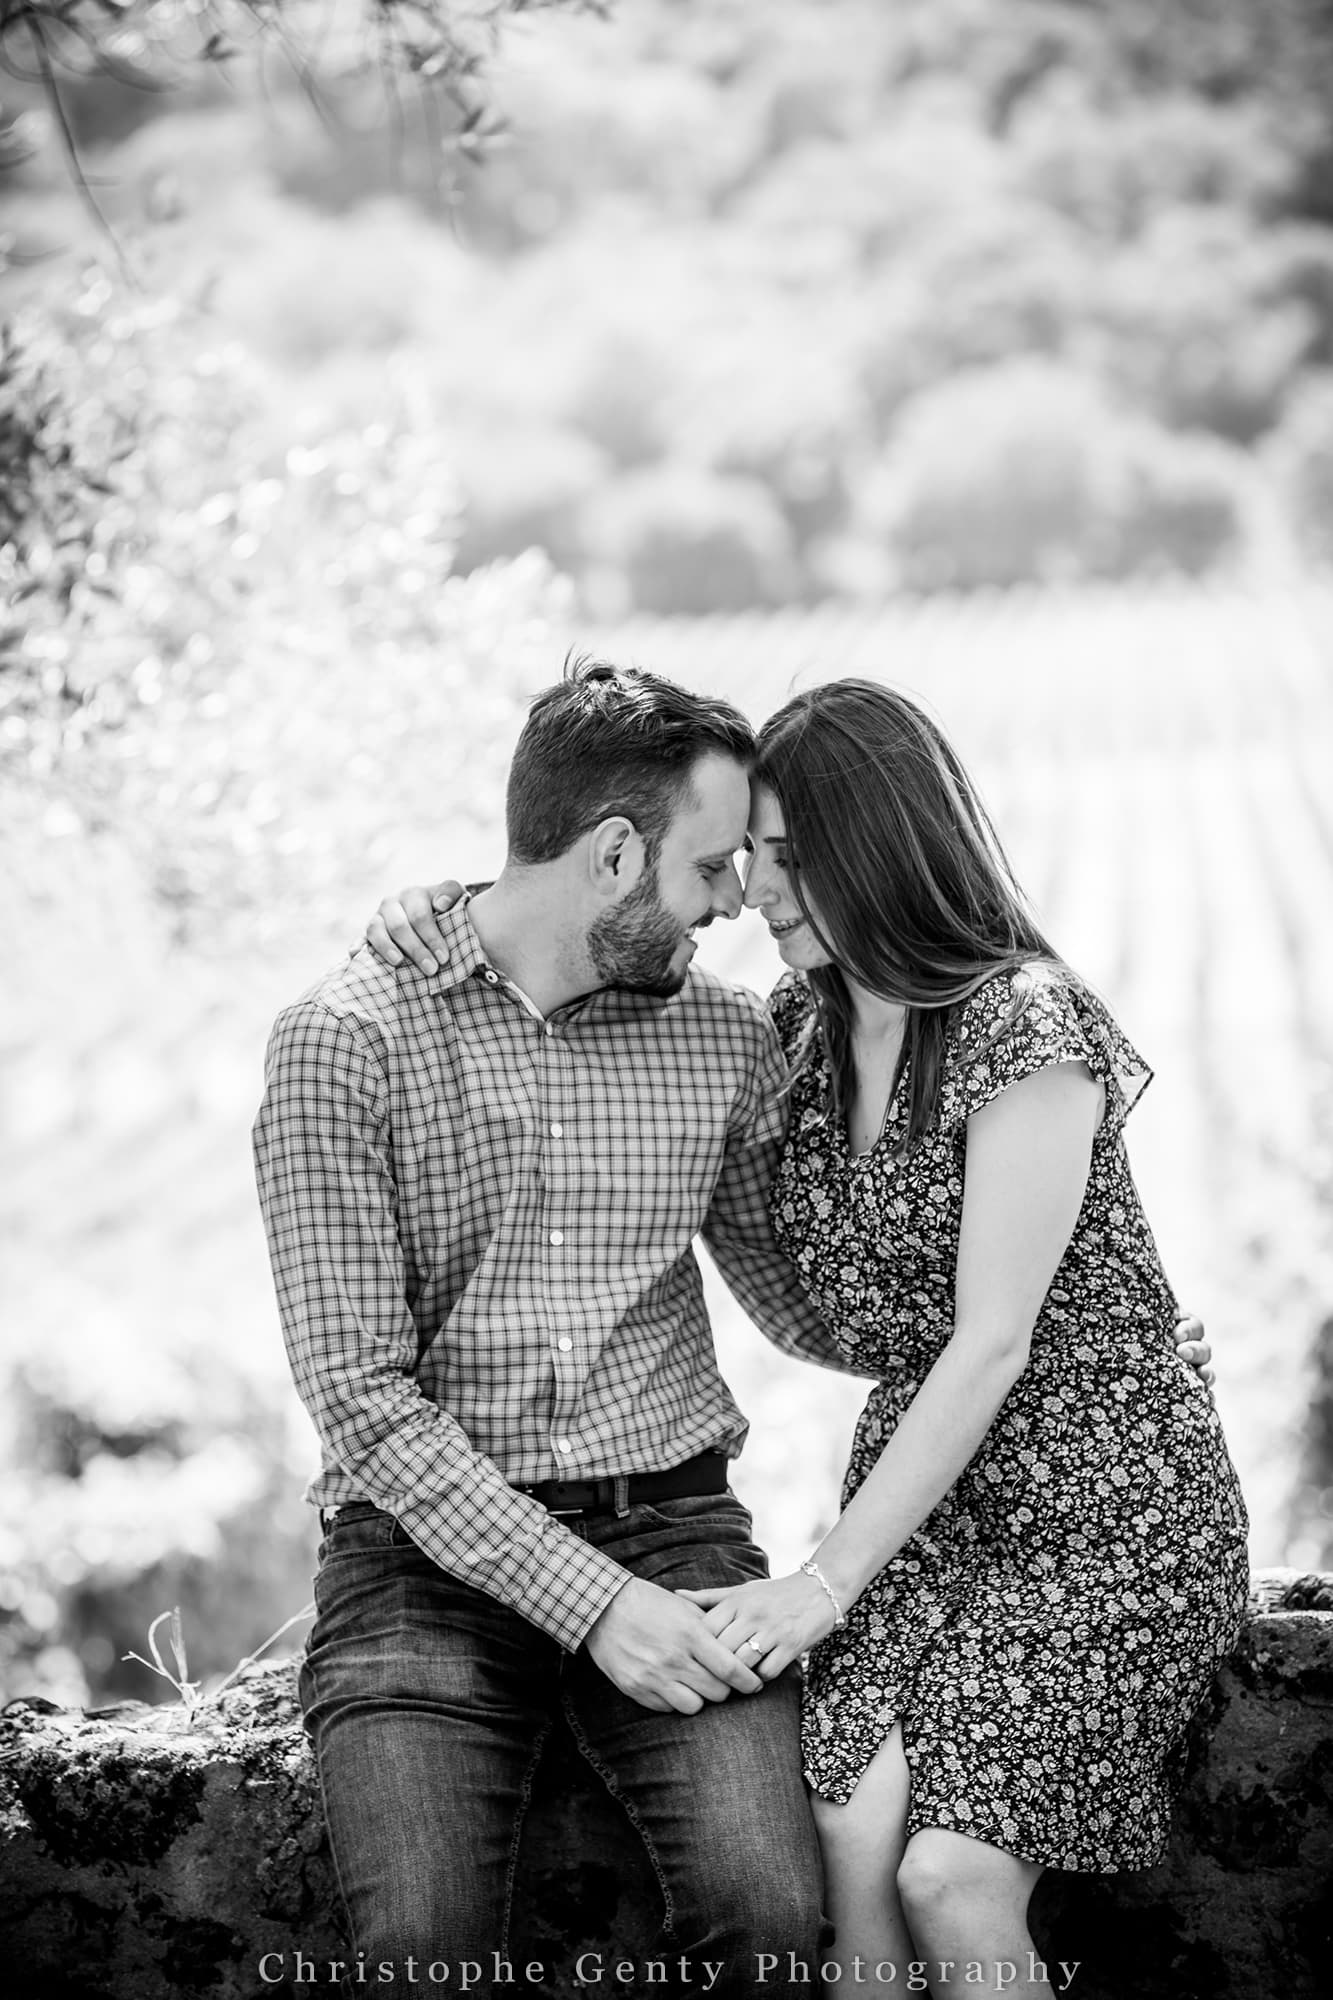 Best Proposal ideas  in the Napa Valley